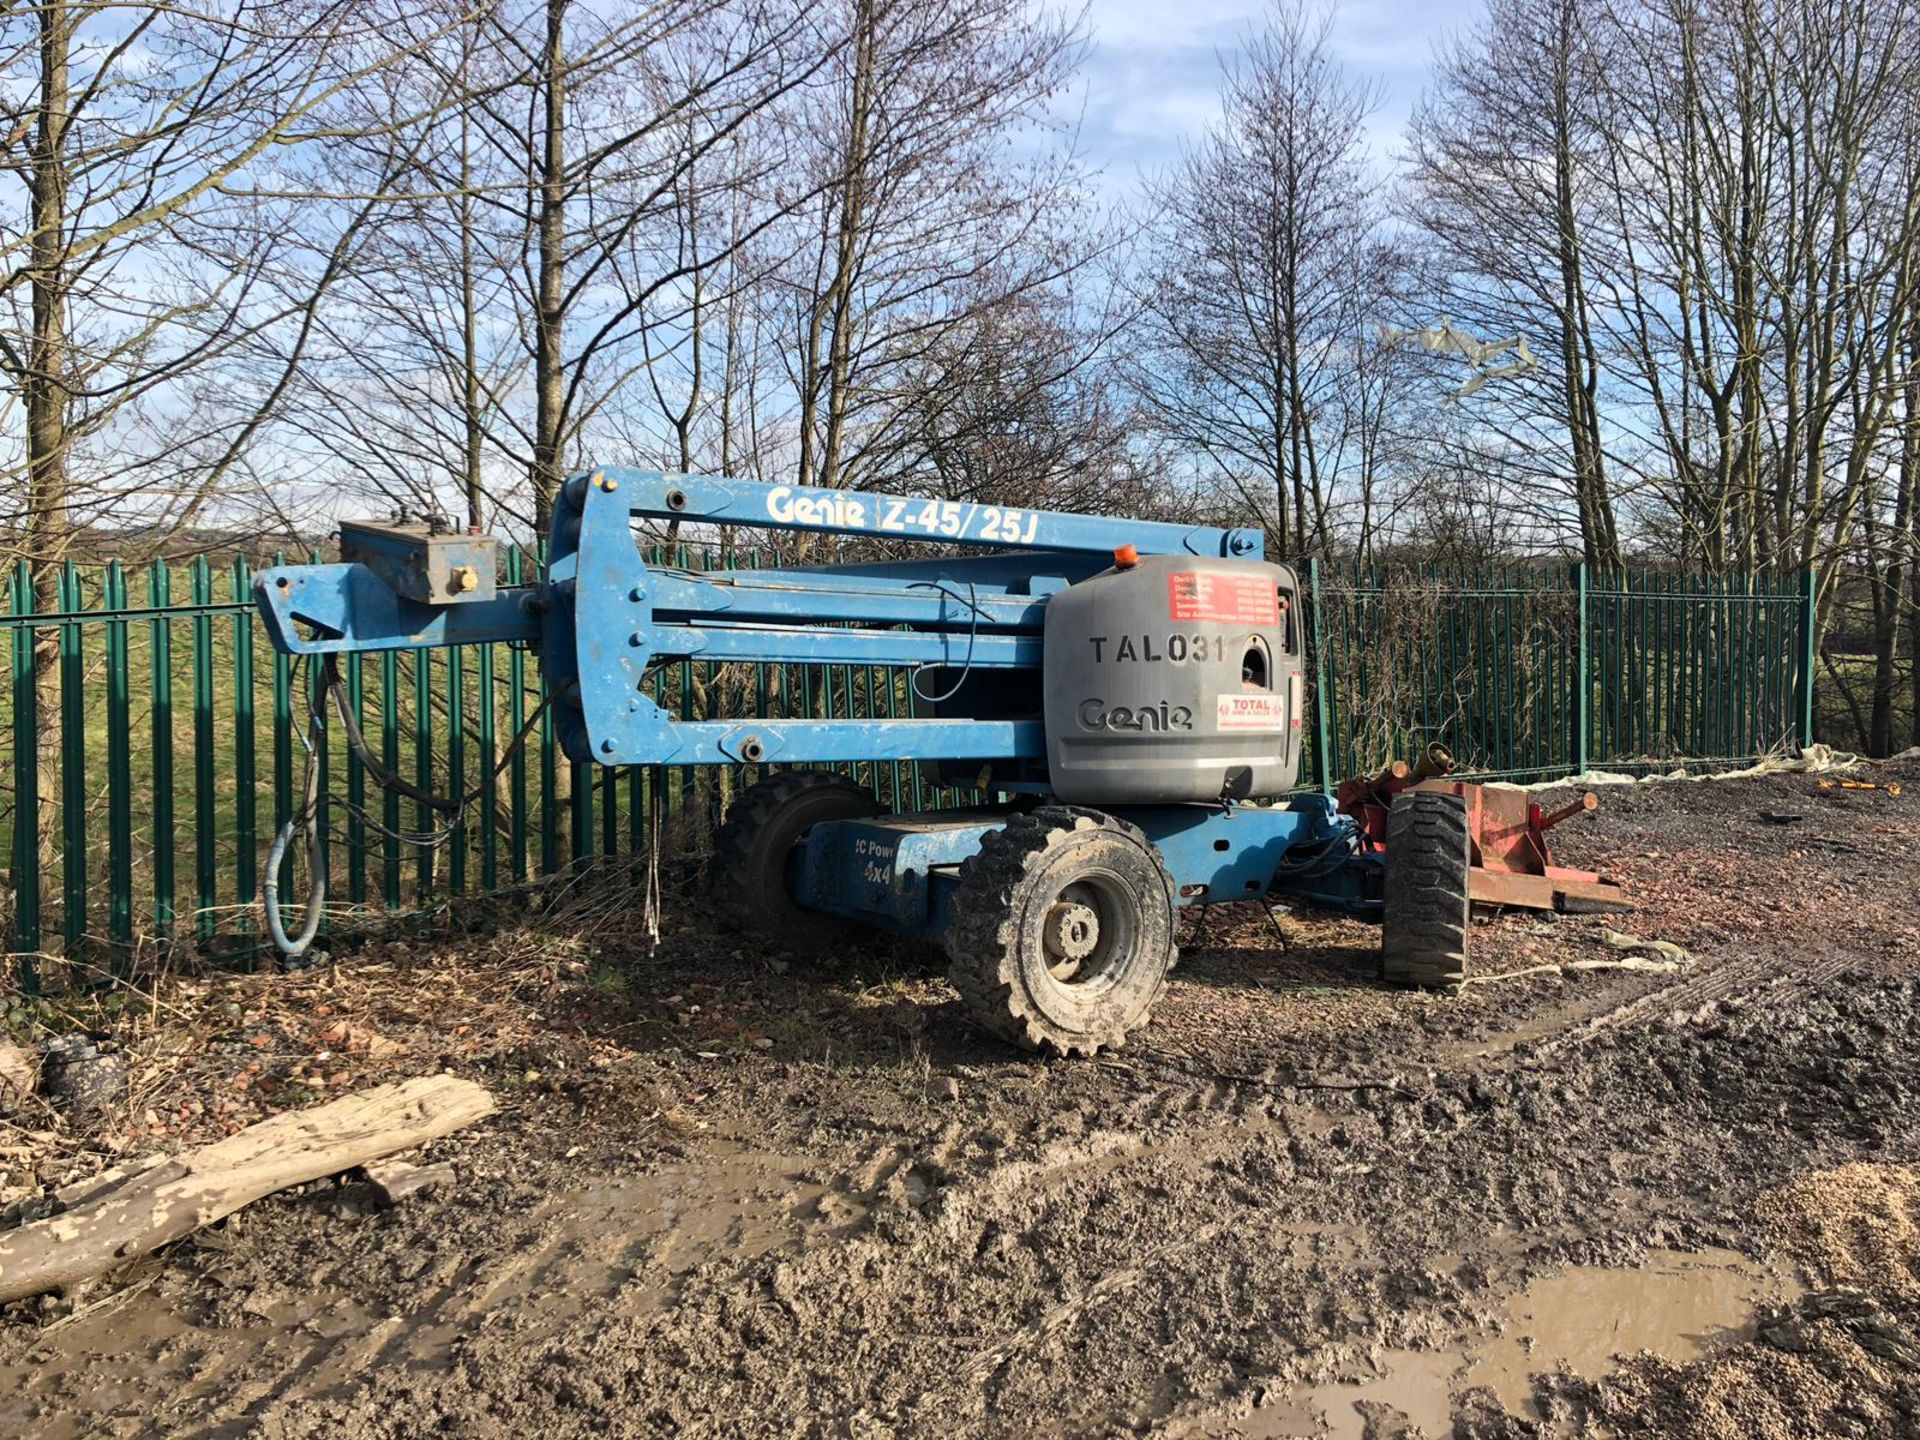 TWO 2 X GENIE BOOM LIFTS MODEL Z45 - 25J 4X4, YEAR 2001 SELLING AS SPARES / REPAIRS *PLUS VAT*